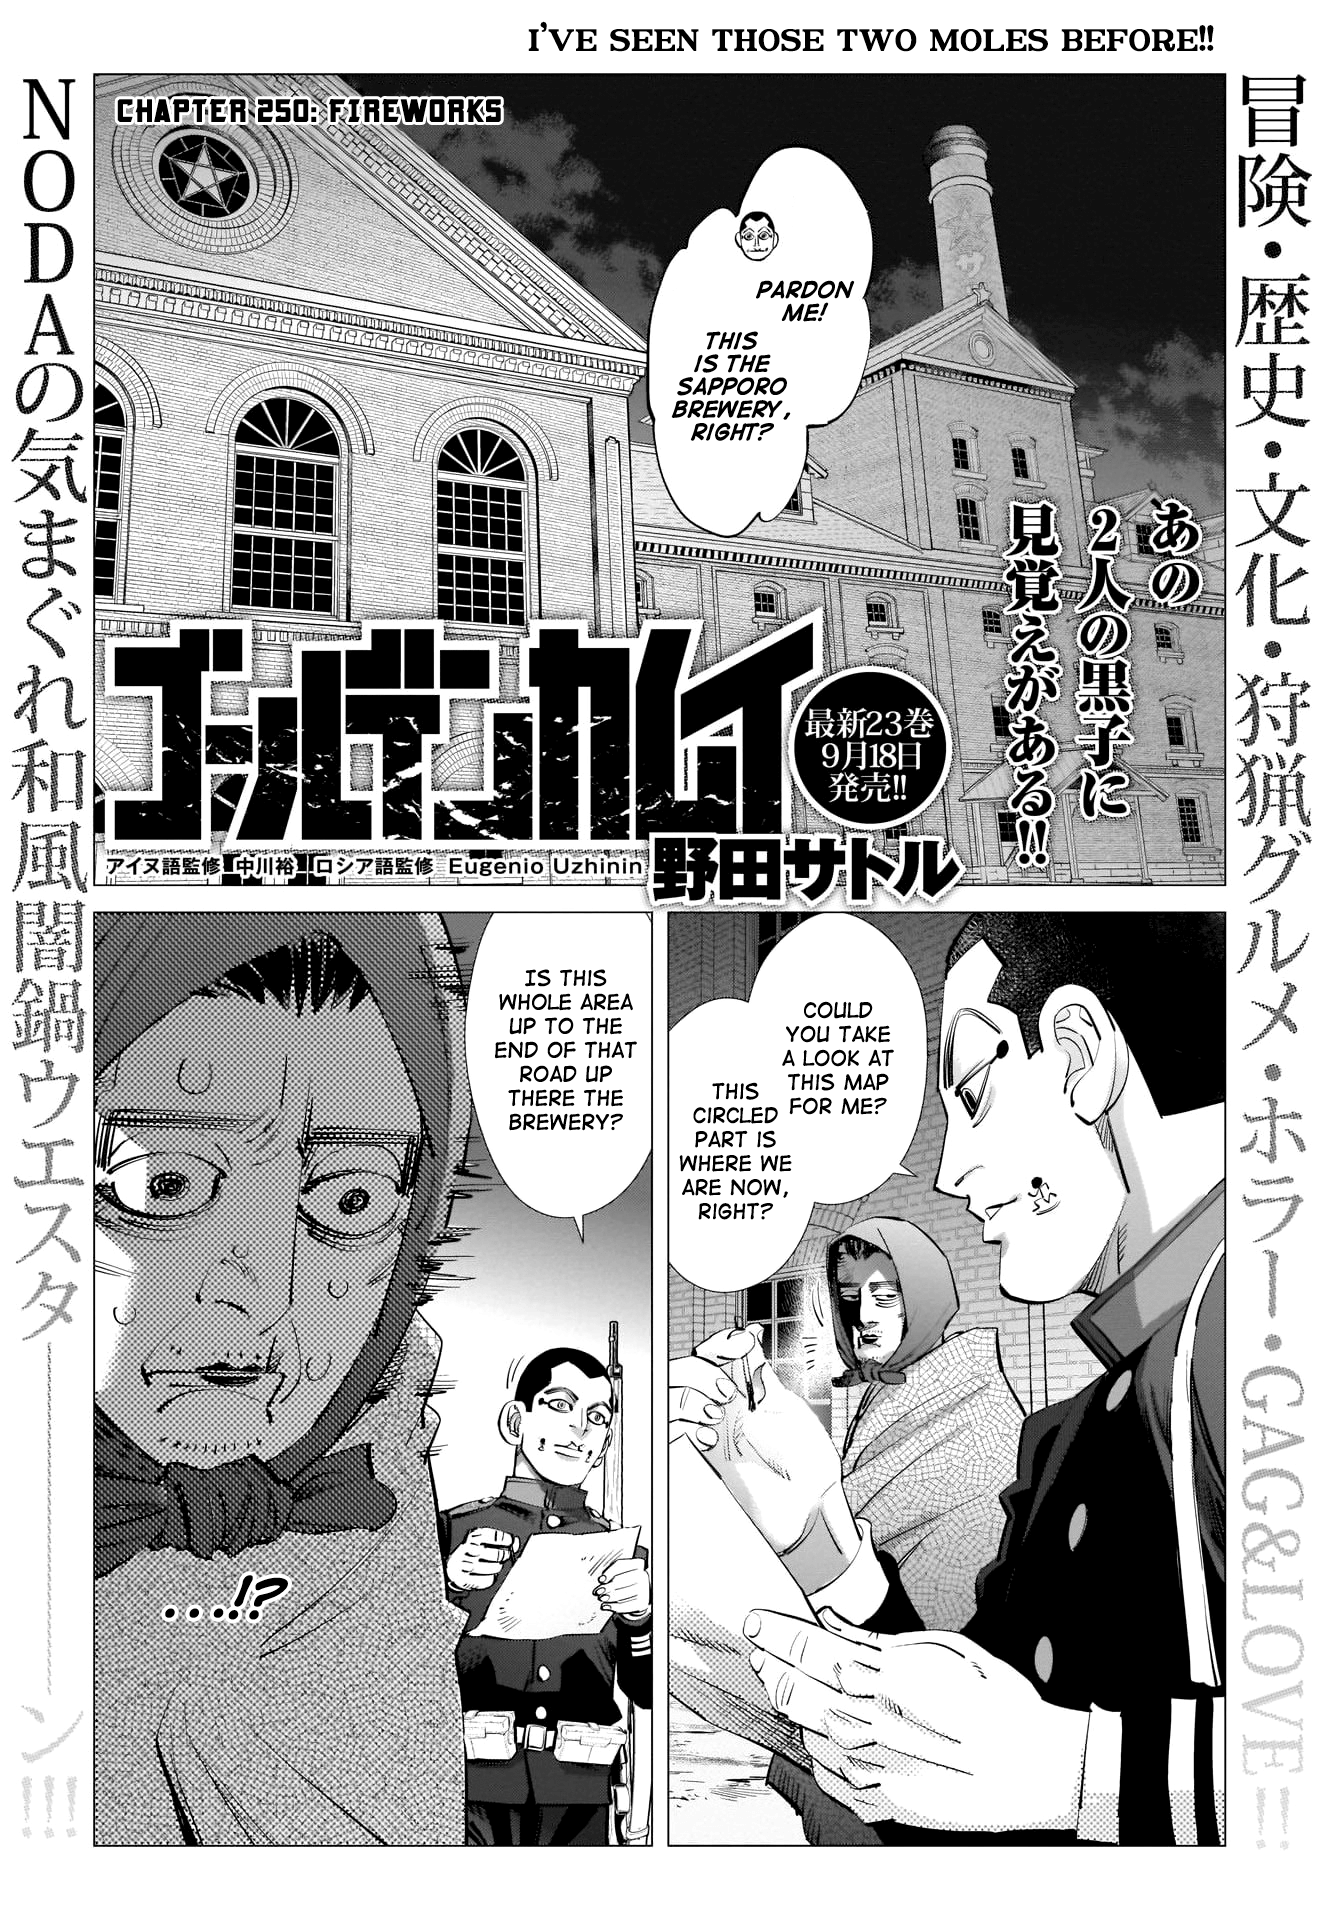 Golden Kamui Chapter 250: Fireworks - Picture 2